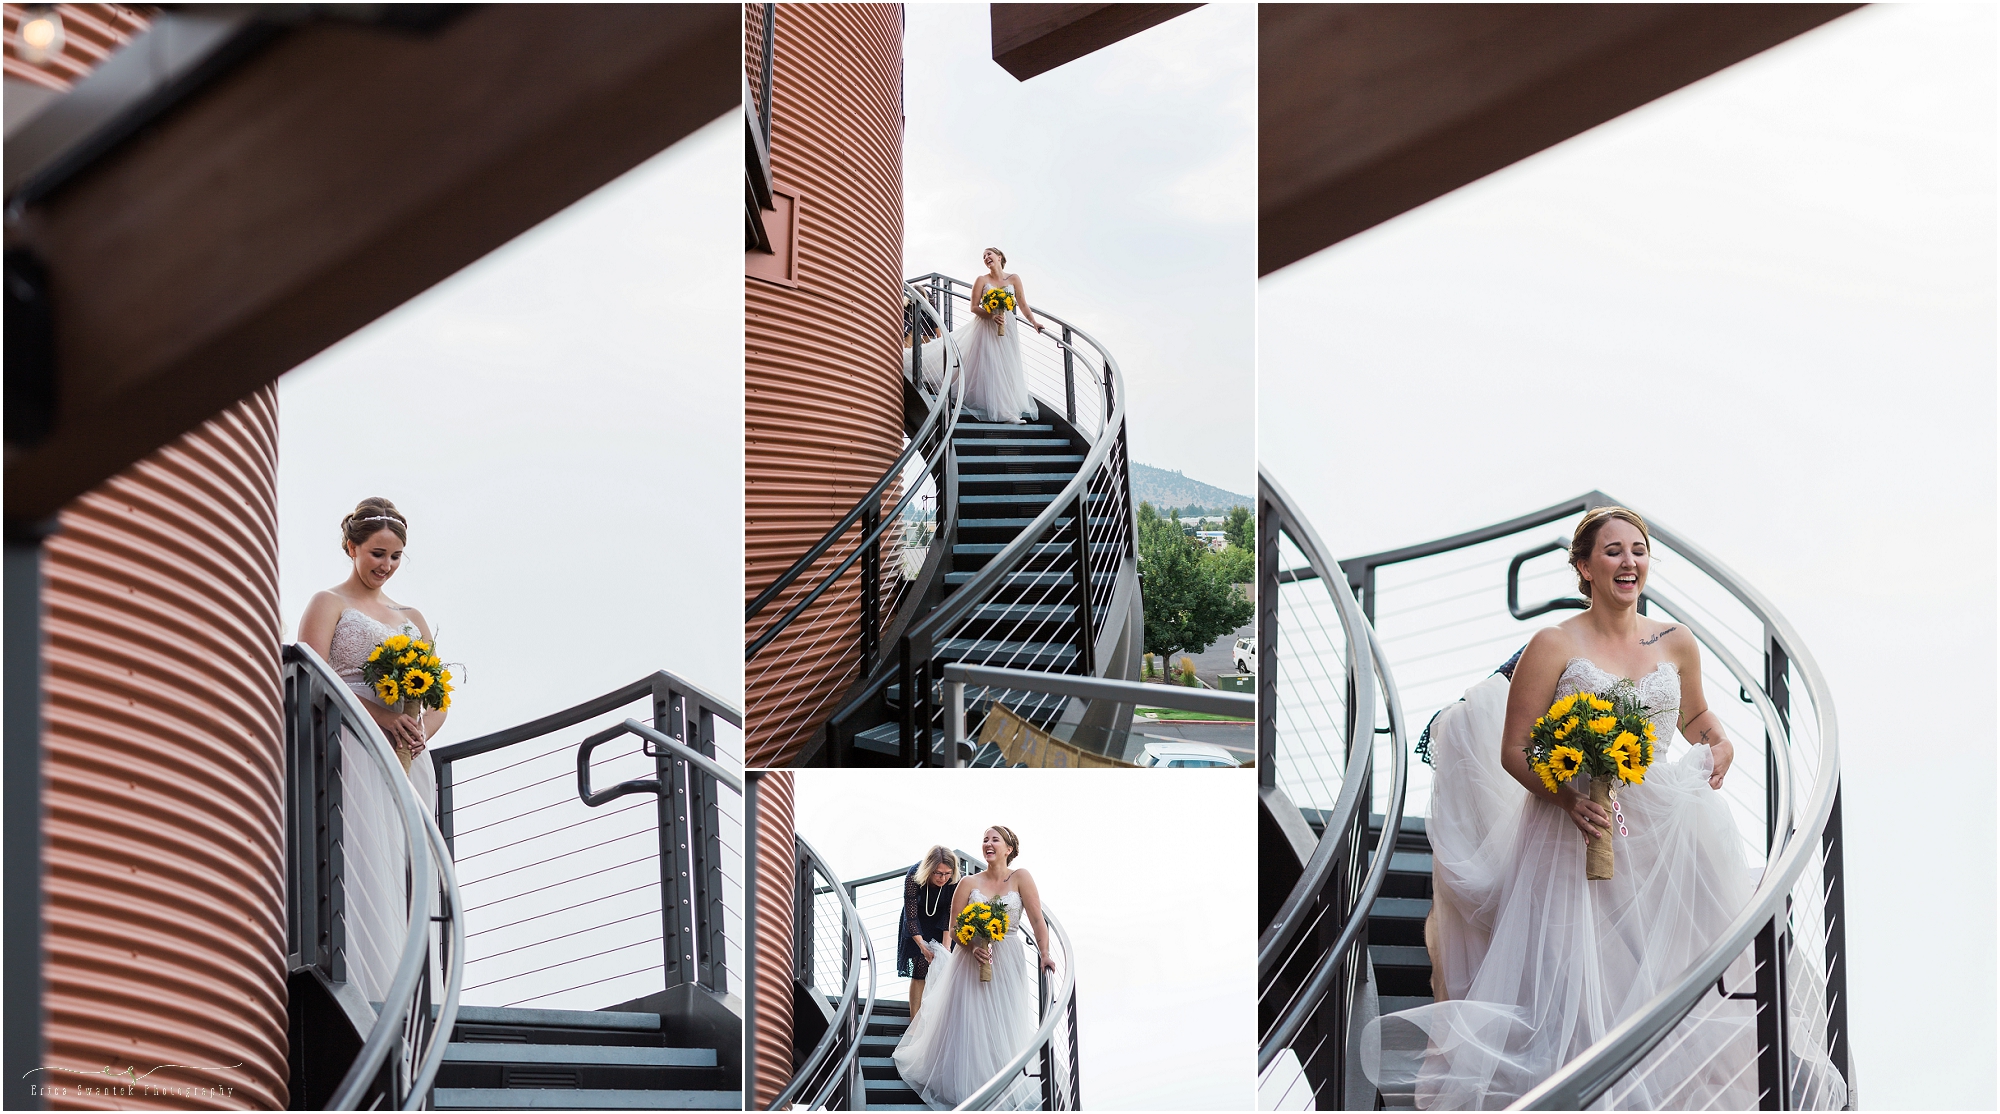 The bride walks down the spiral staircase that leads to the Hopservatory at her Worthy Brewing Wedding in Bend, Oregon. | Erica Swantek Photography